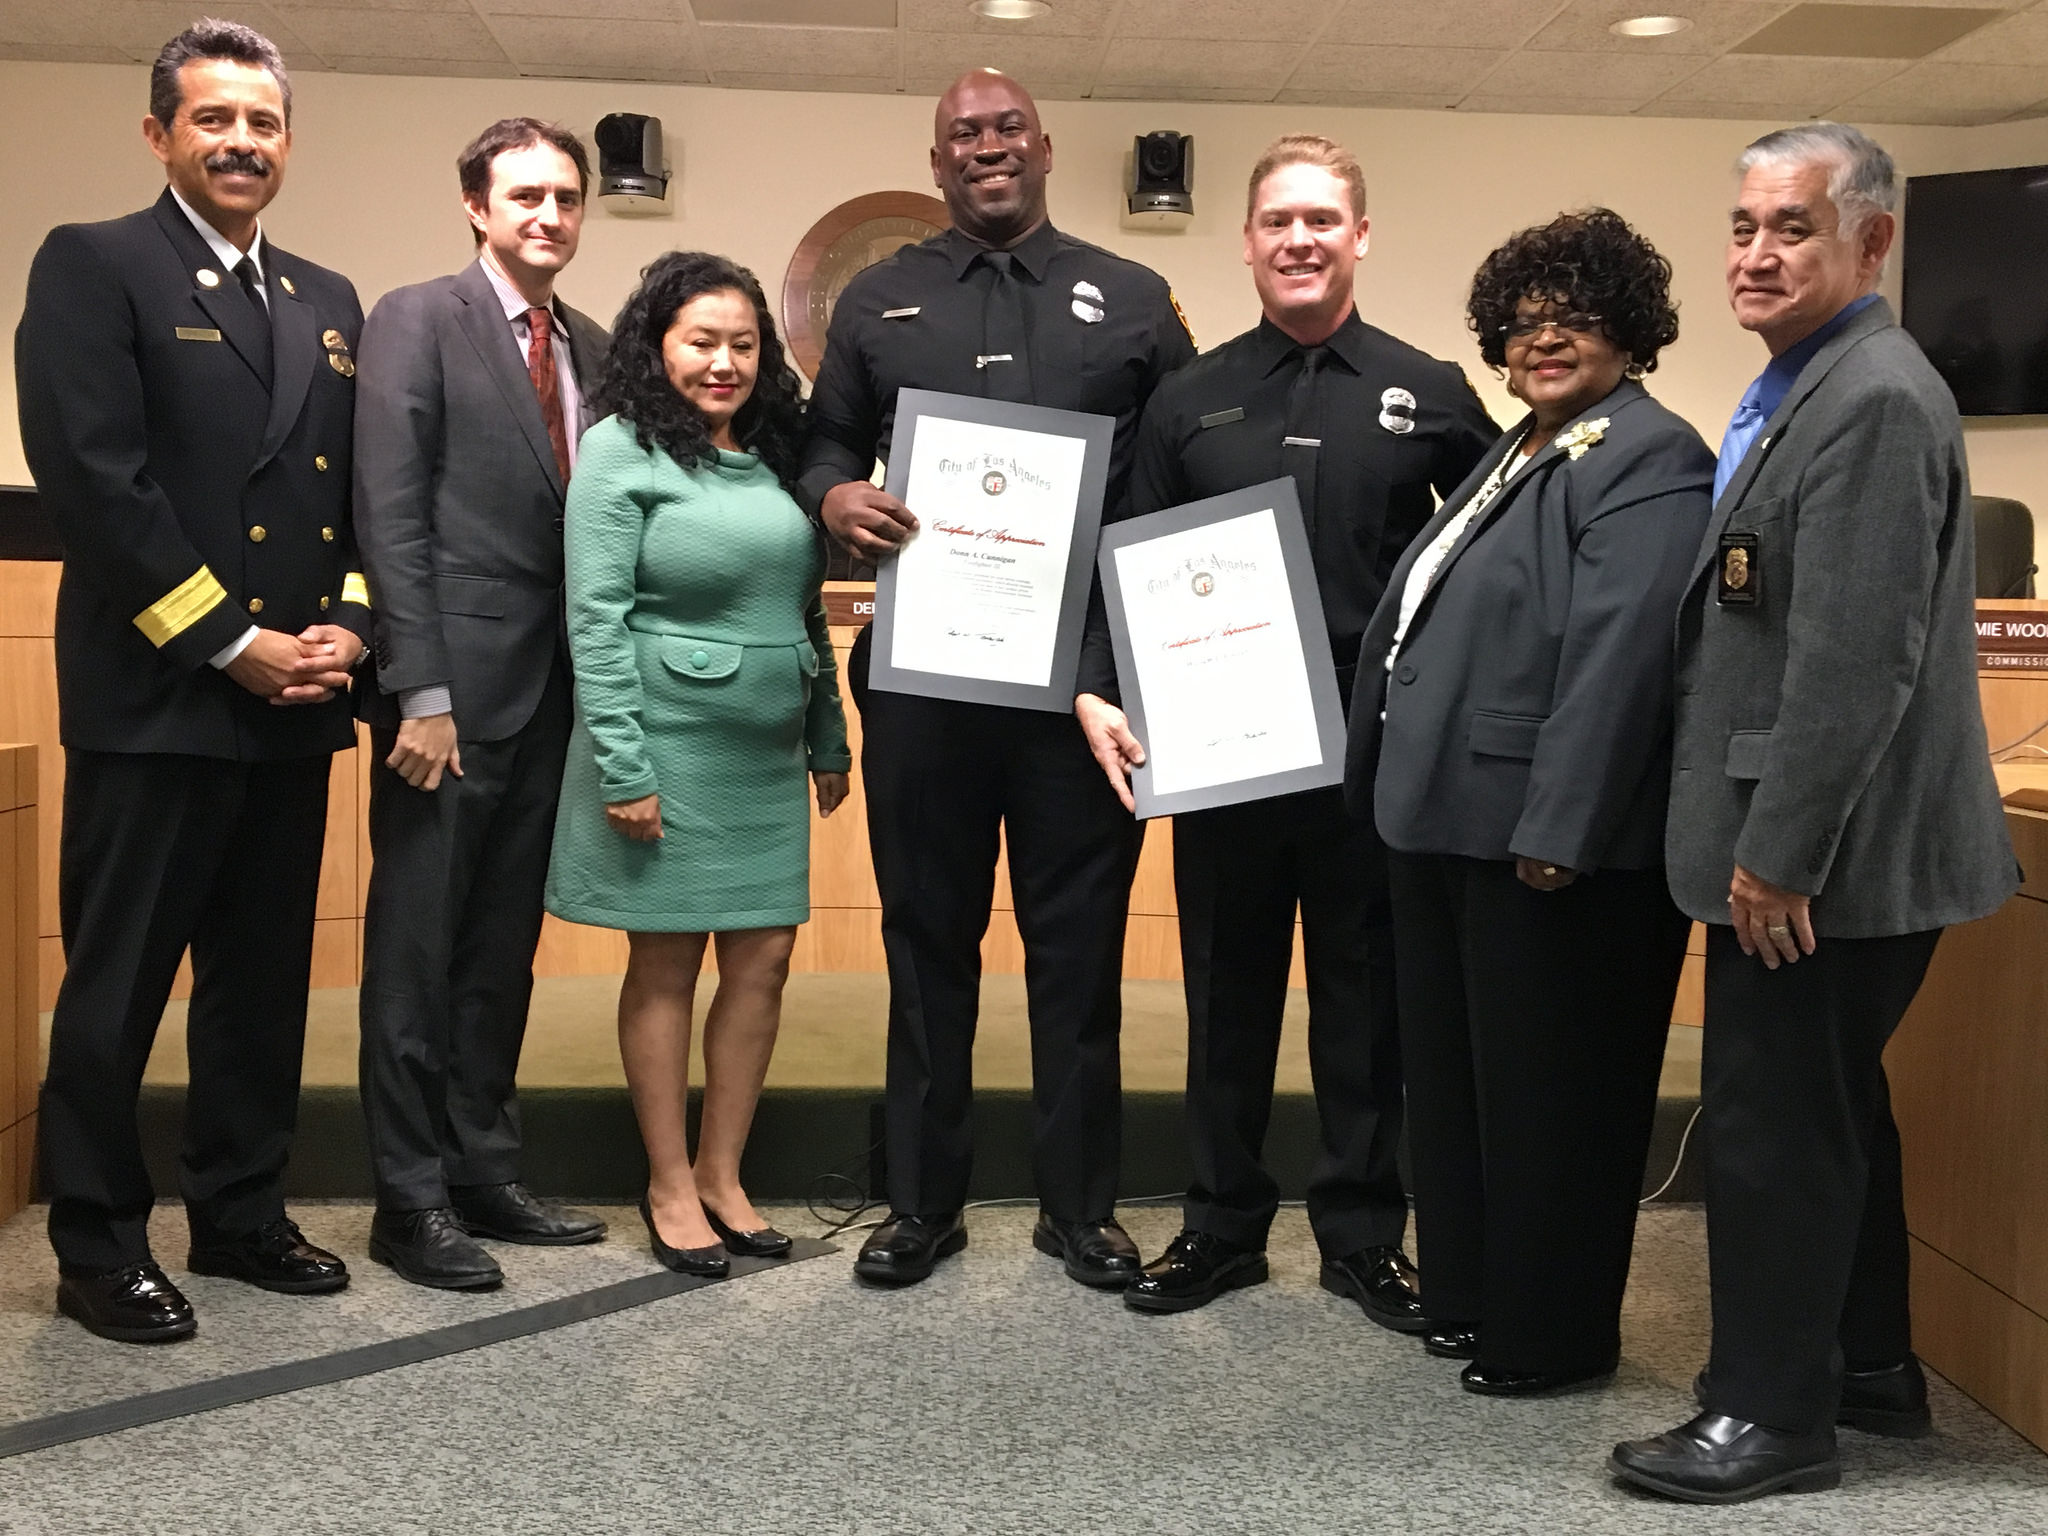 Image of two firefighter awardees standing with Fire Chief and members of the Board of Fire Commissioners